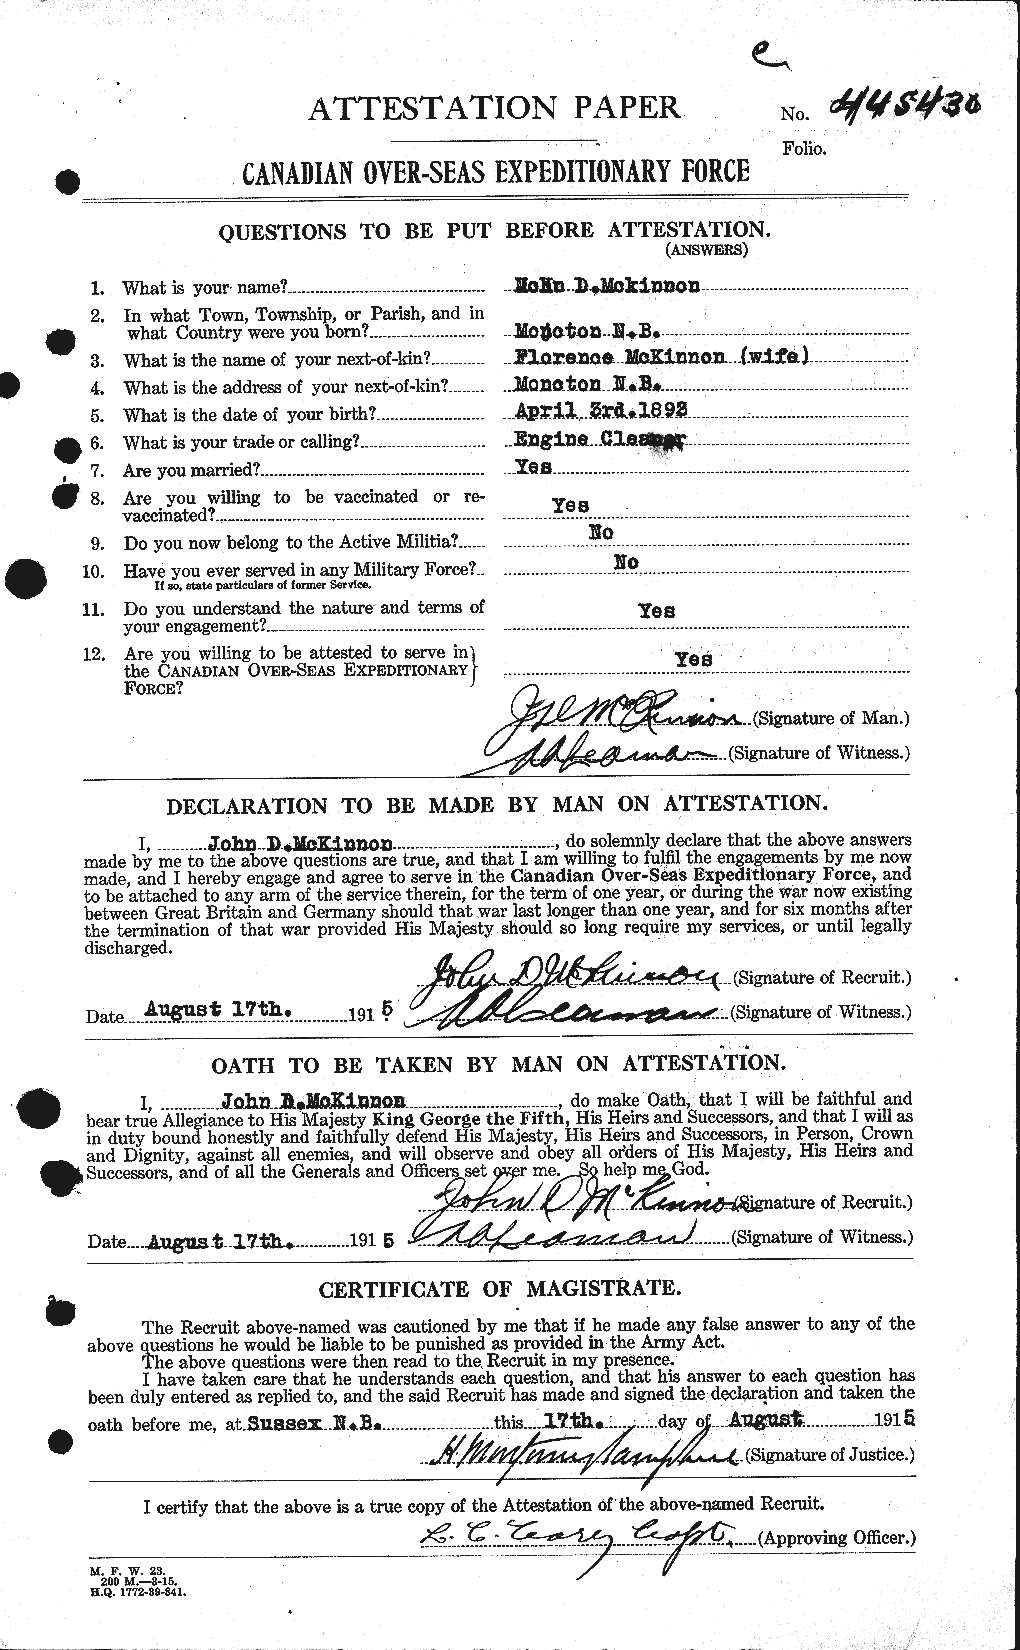 Personnel Records of the First World War - CEF 533036a